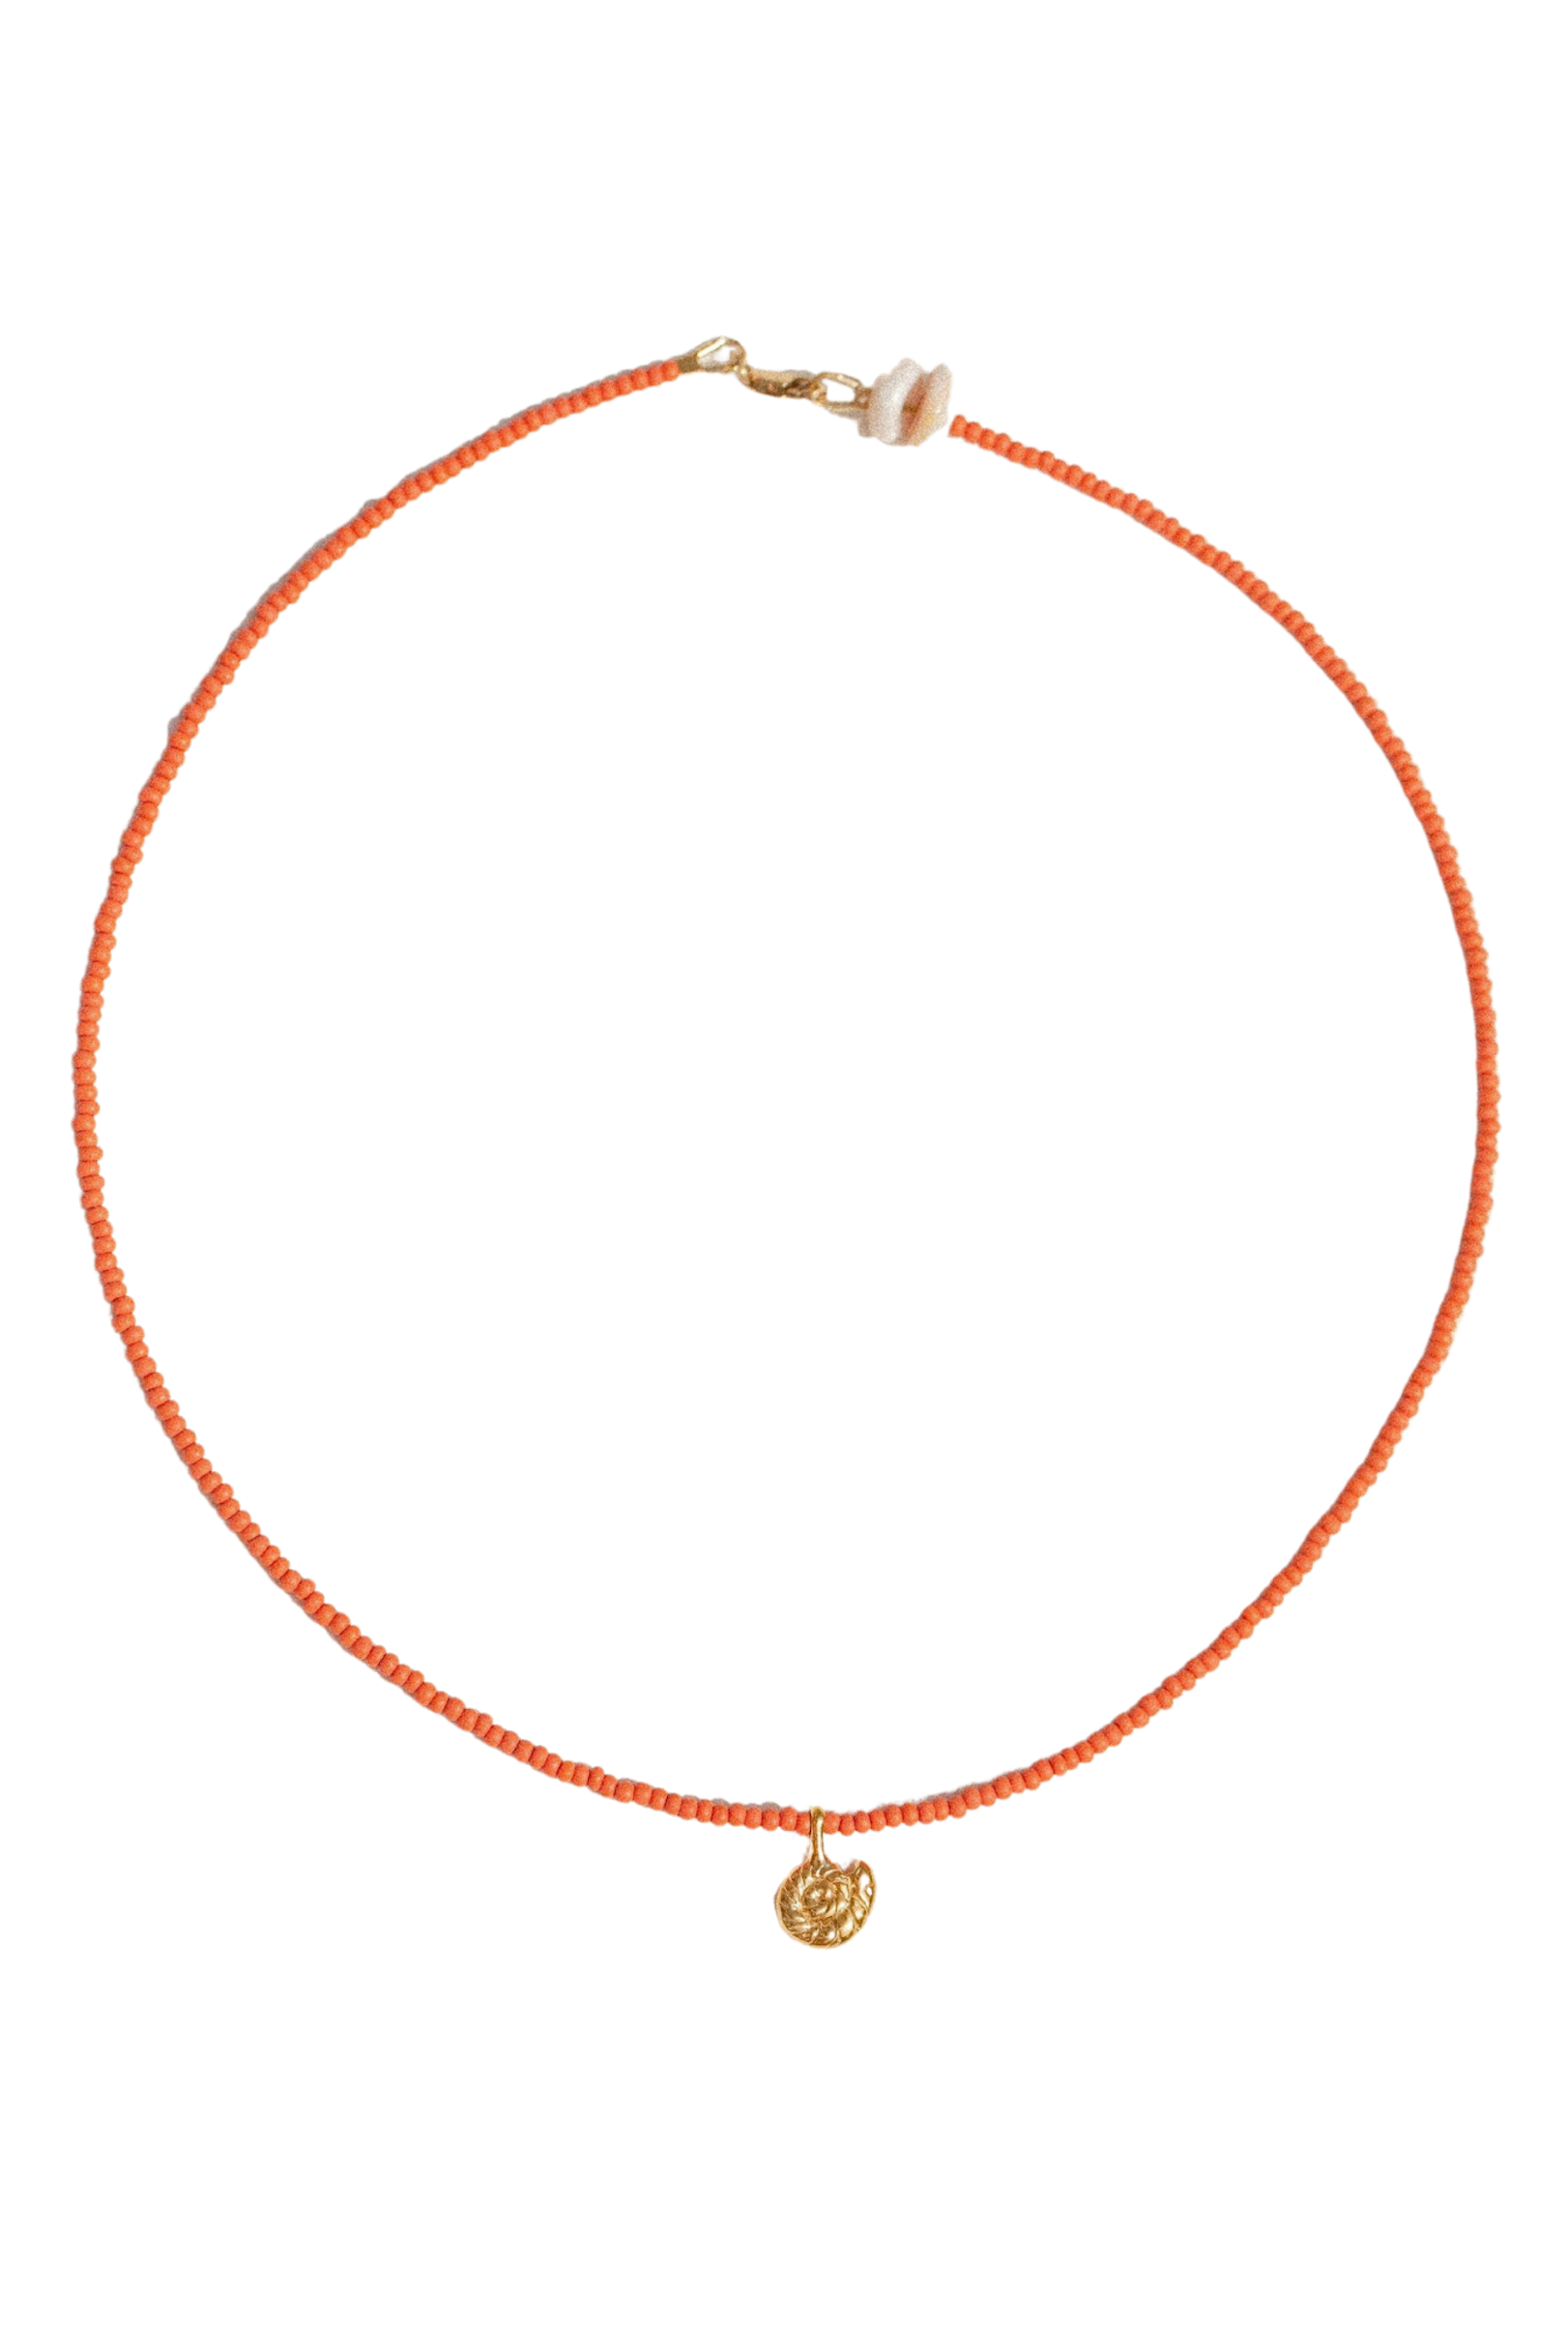 Endless Summer Necklace // Coral